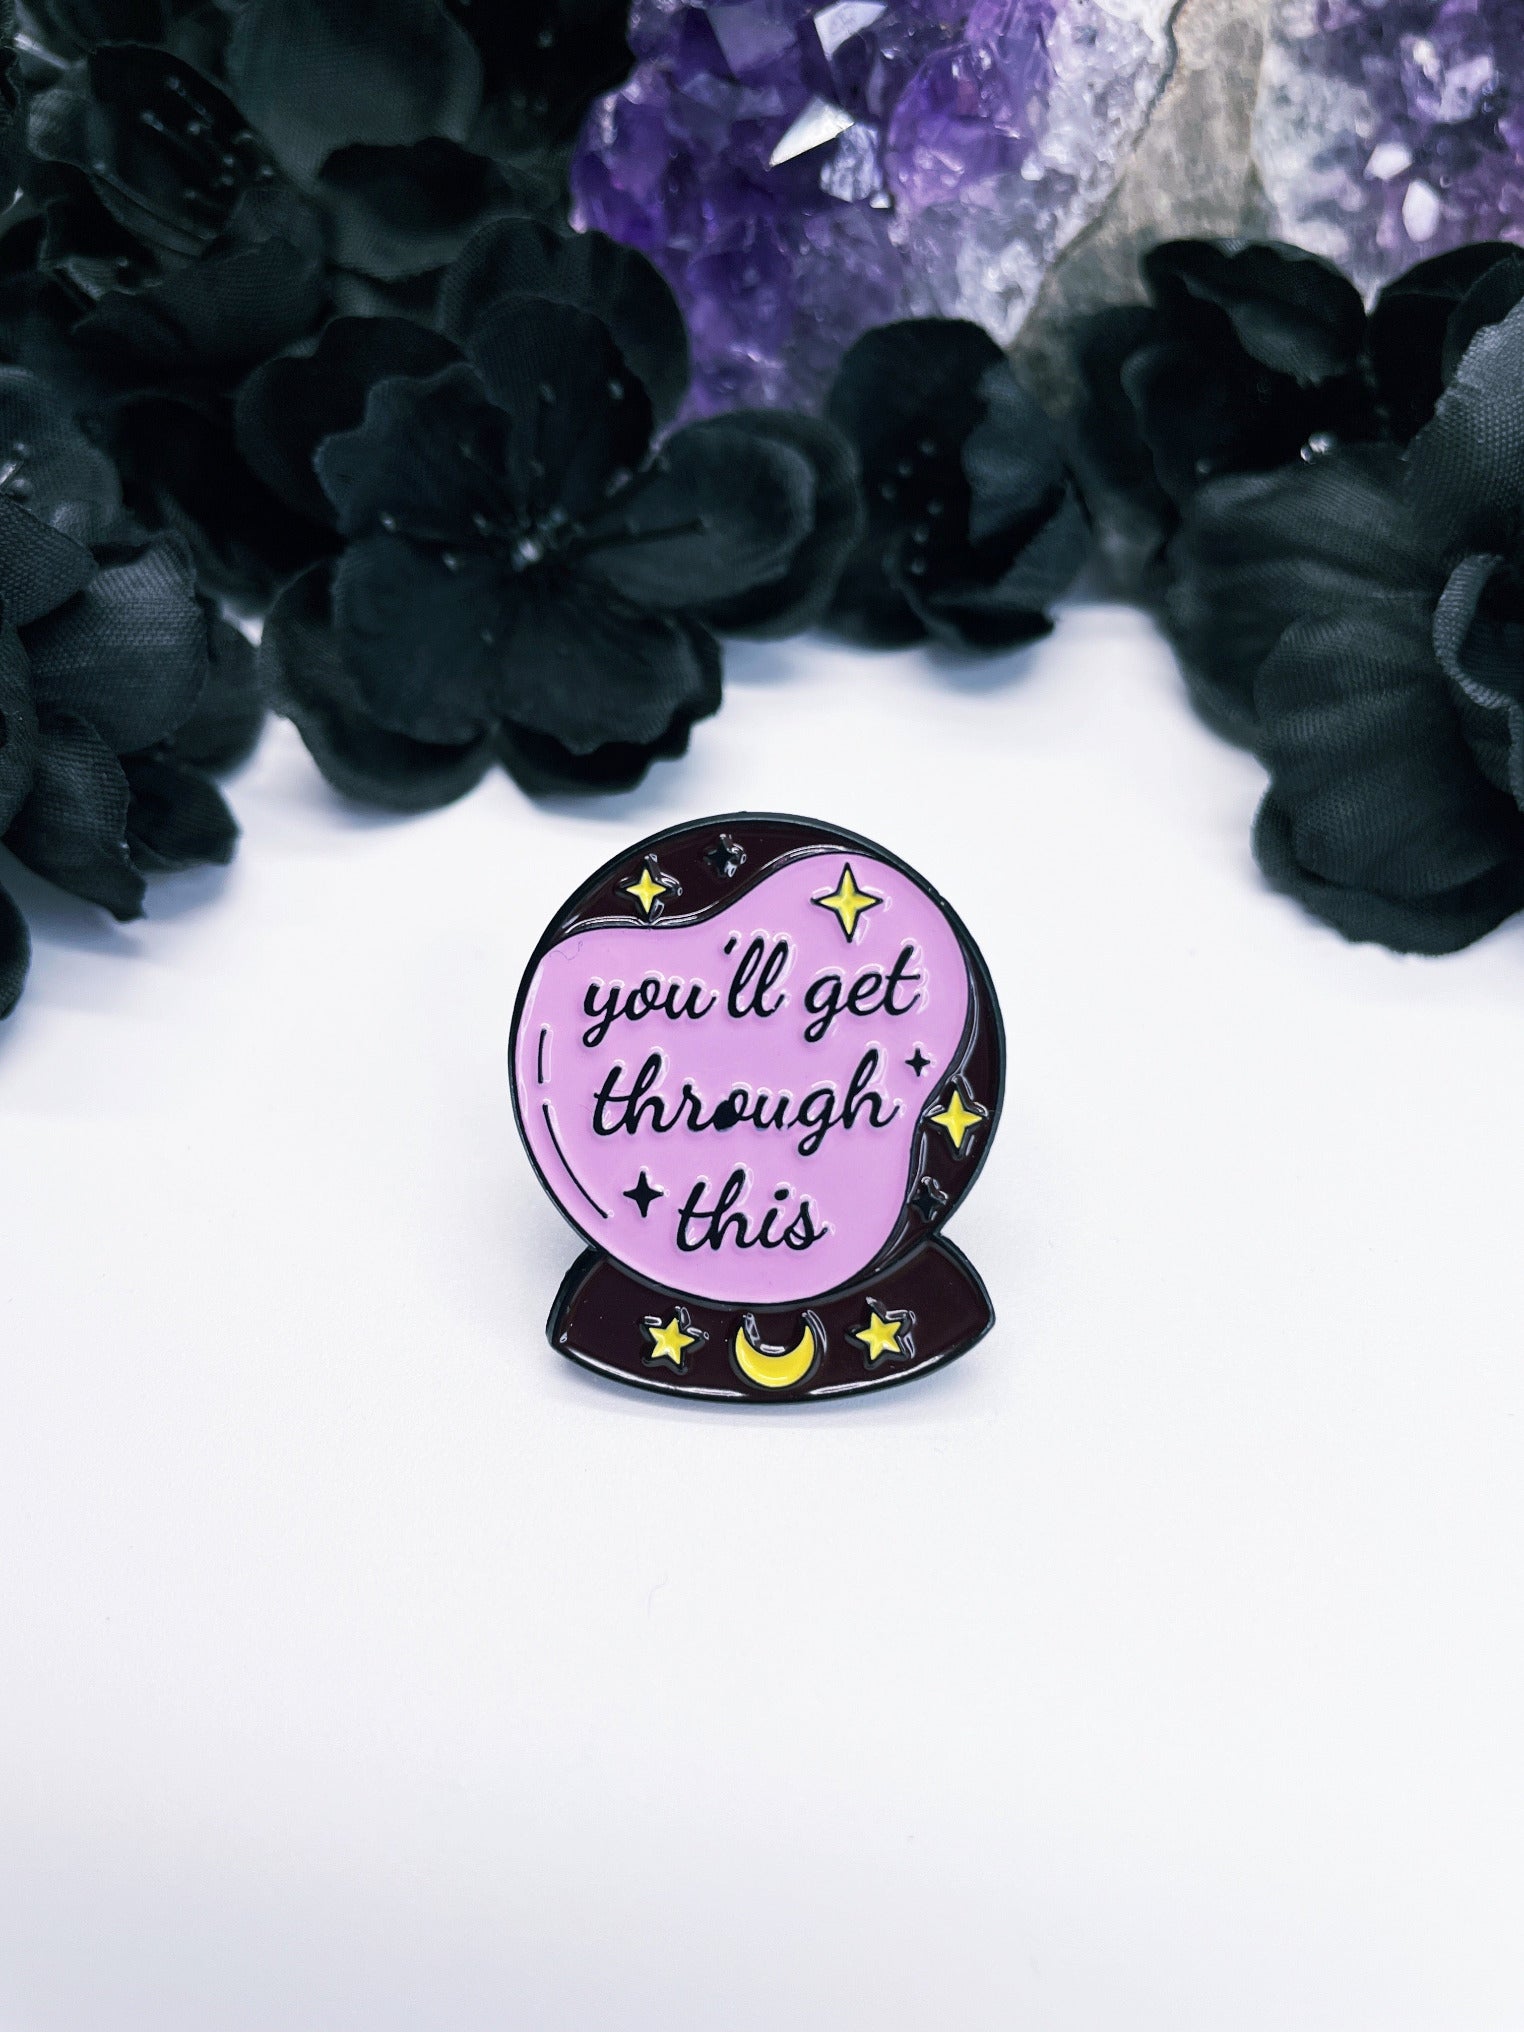 An enamel pin featuring a purple crystal ball with the words "you'll get through this" in black letters.